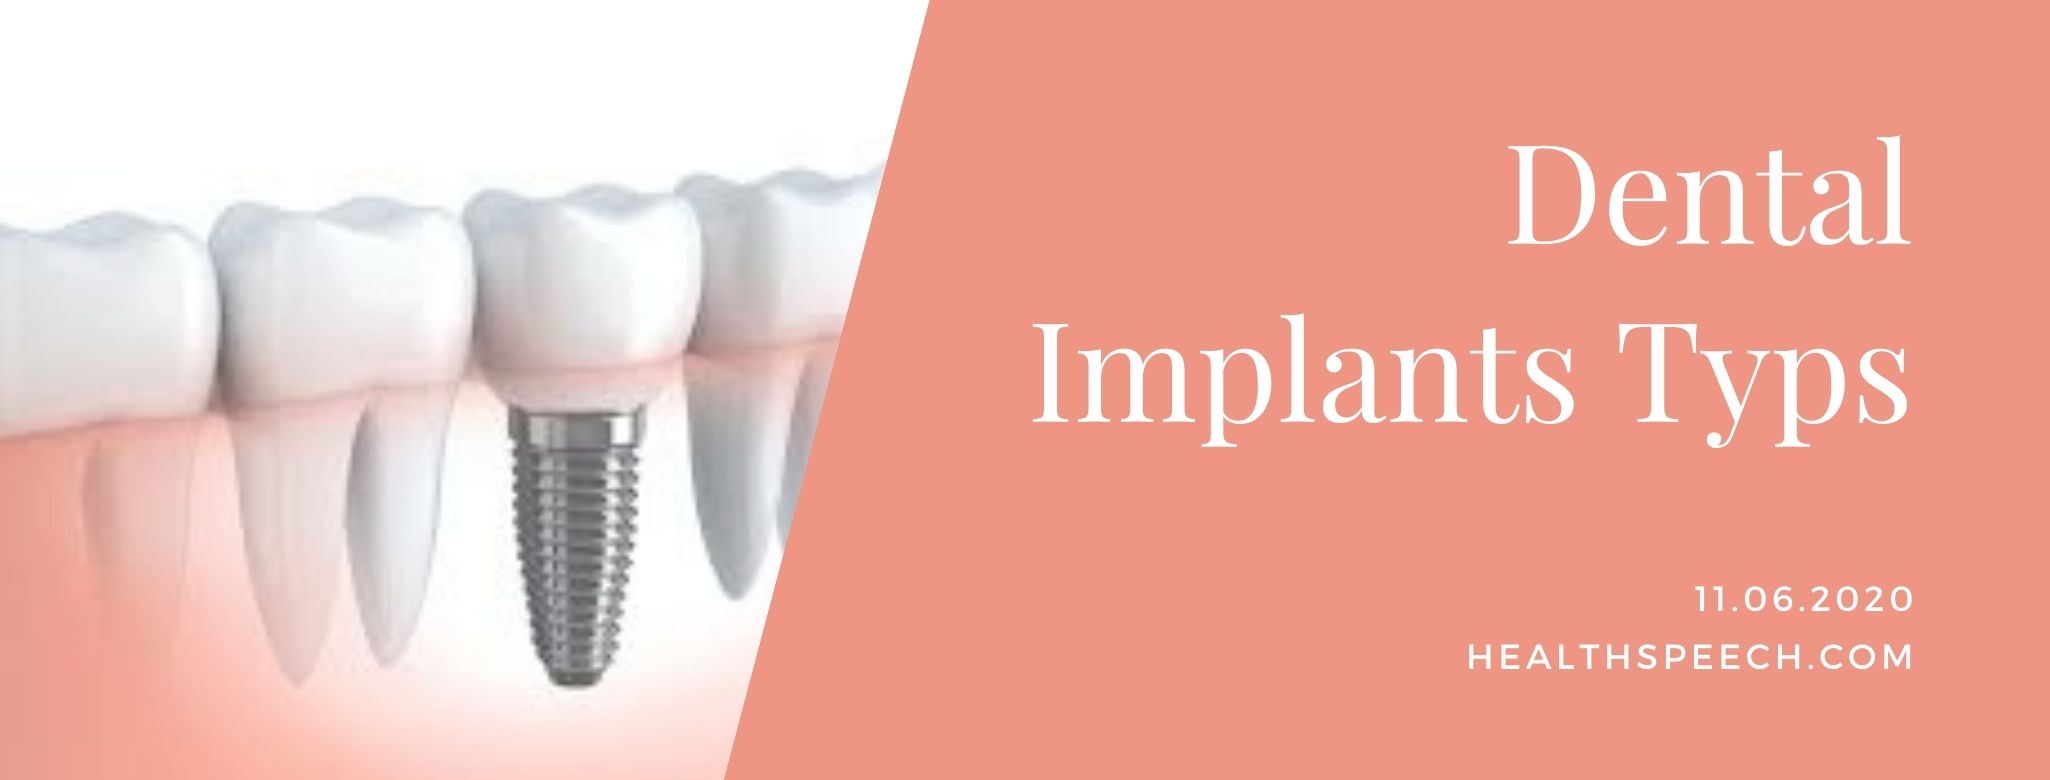 What is a dental implant? Types of dental implants and cost